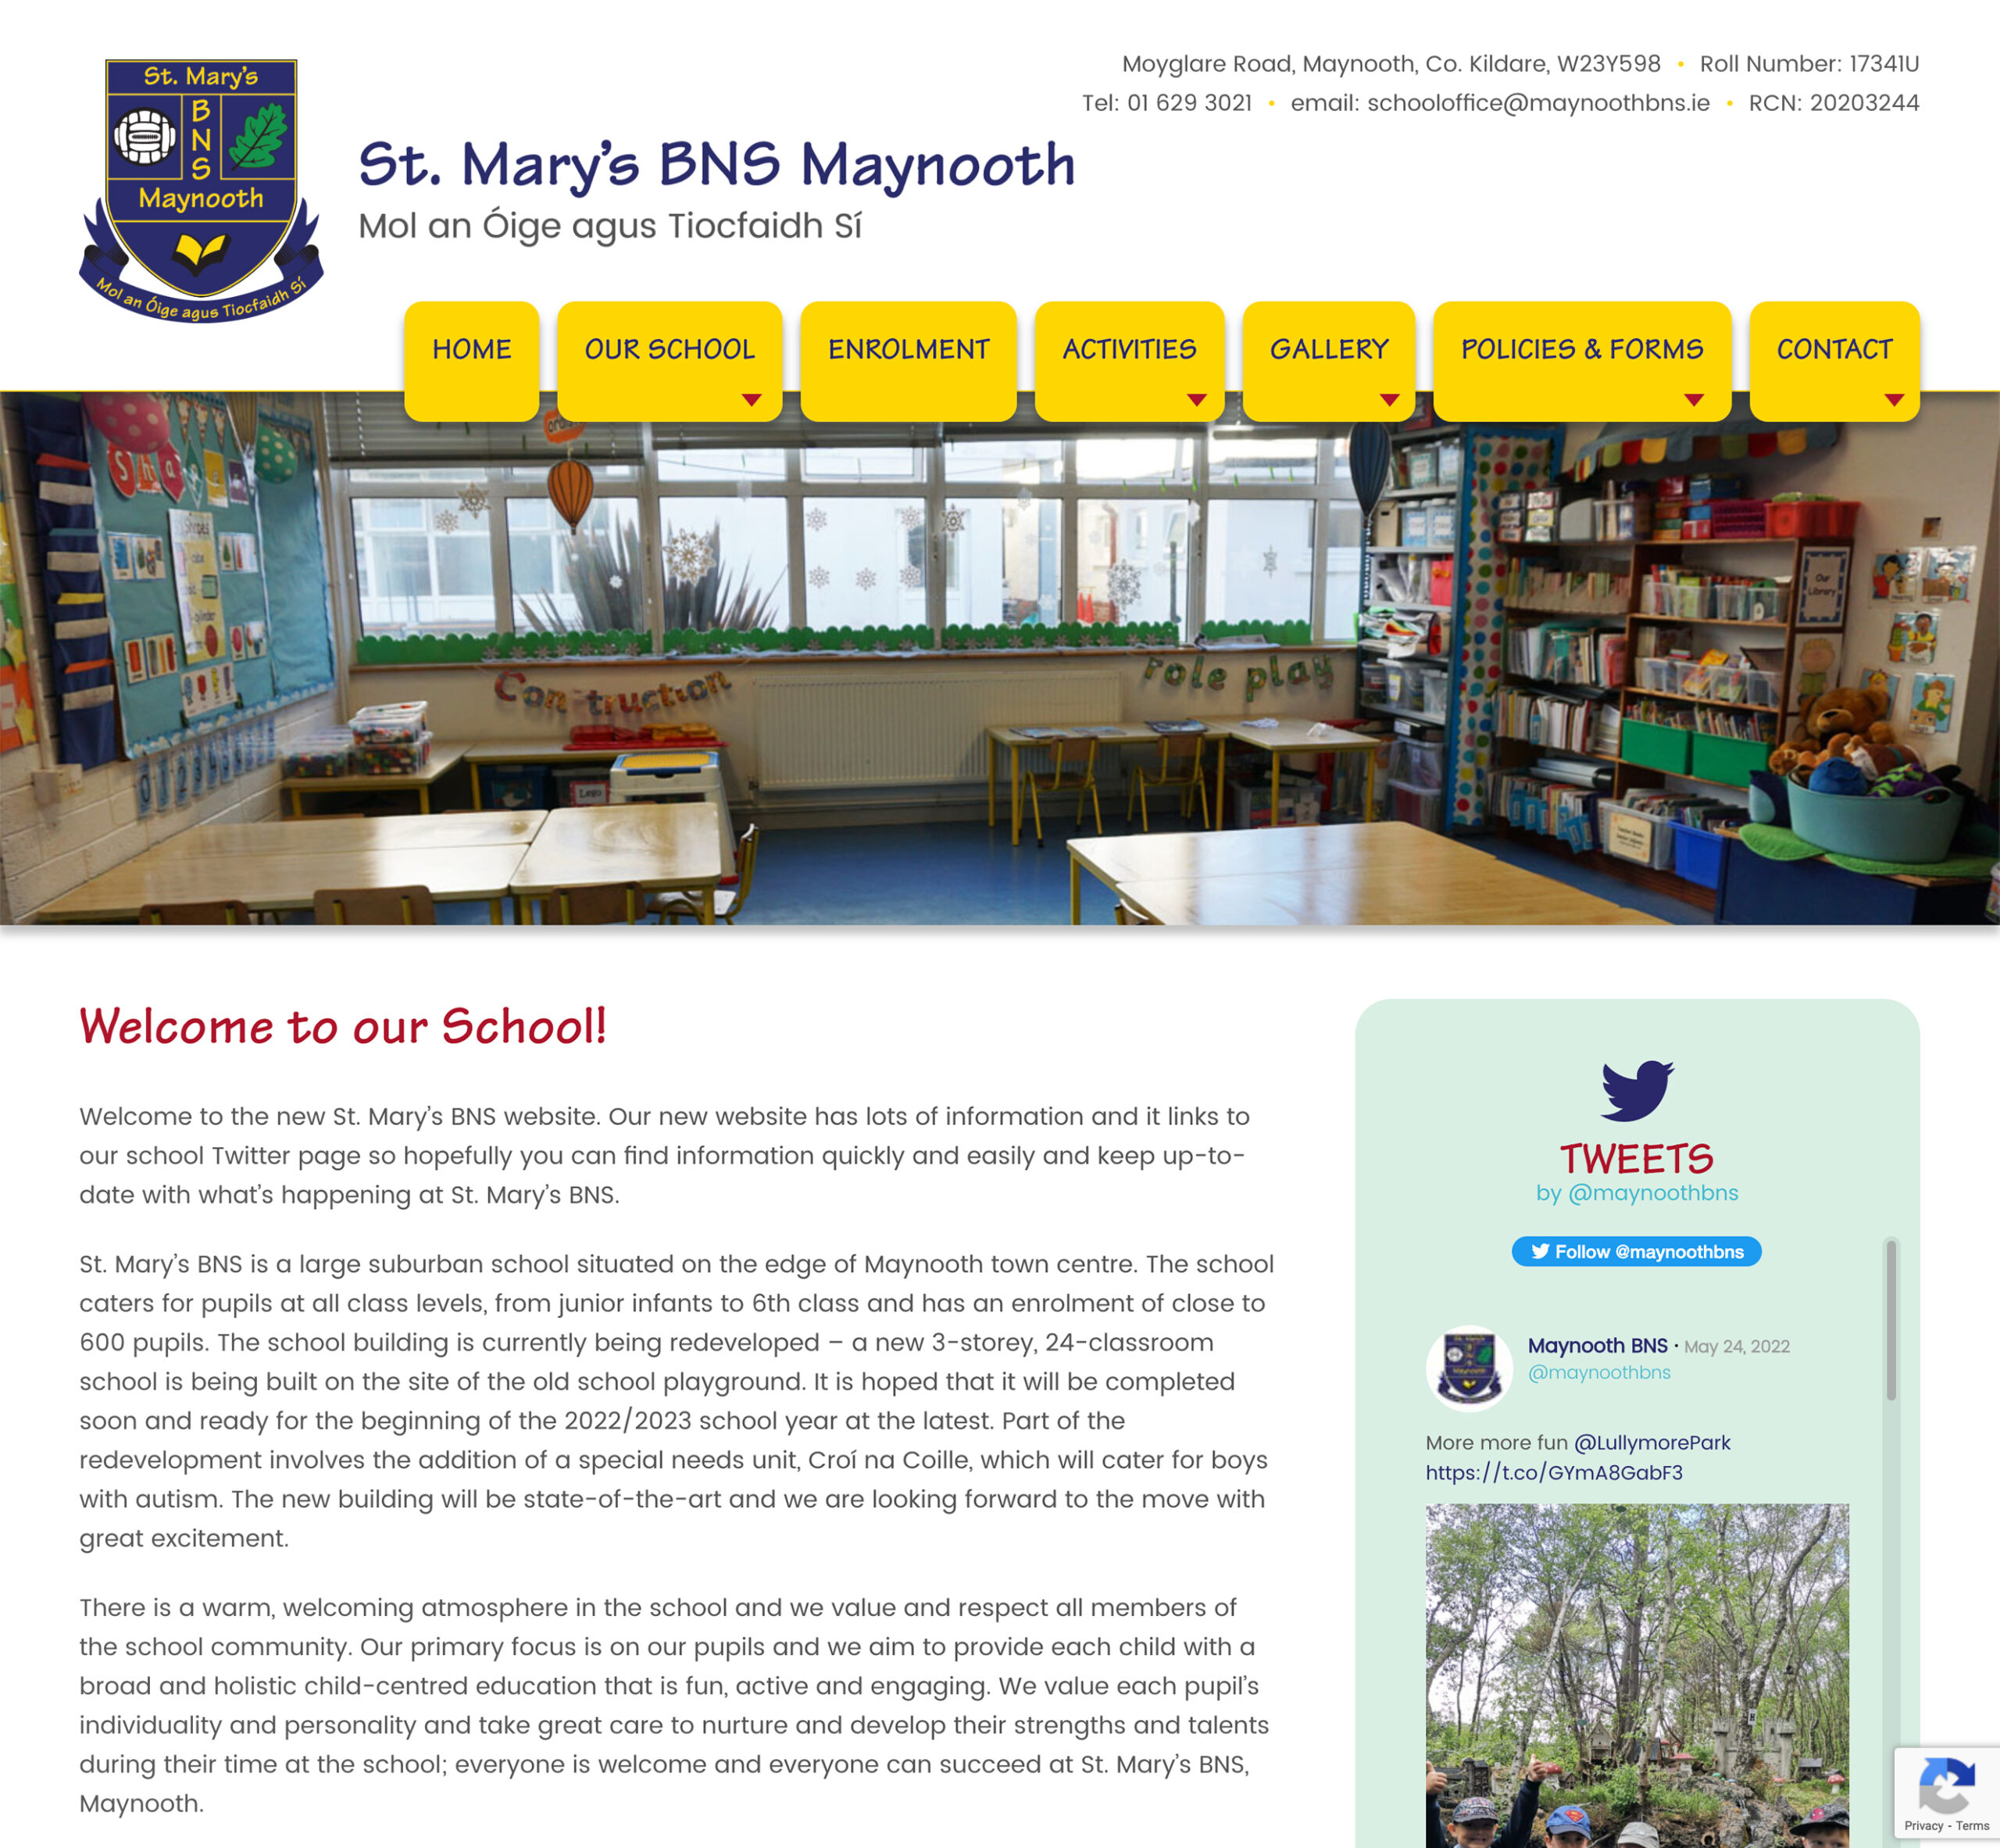 St. Mary's BNS Maynooth School Website